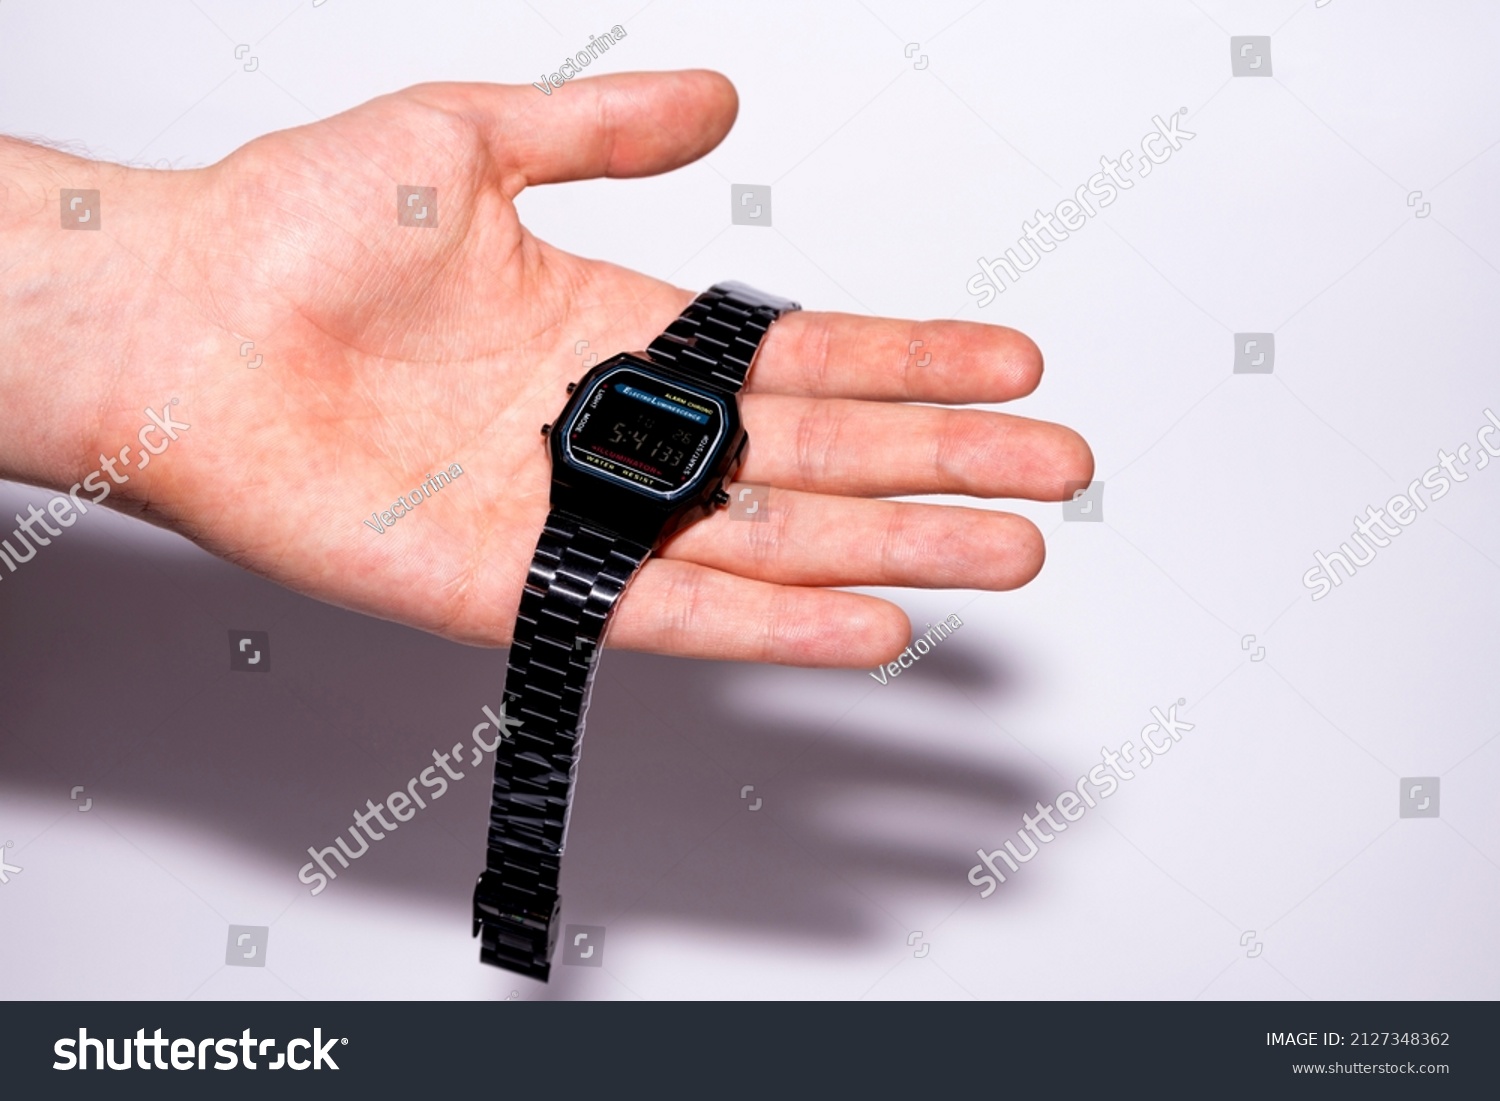 Black electronic watch in a metal case on a human palm. Brand new watch with protective film. Clock isolated on white background. #2127348362